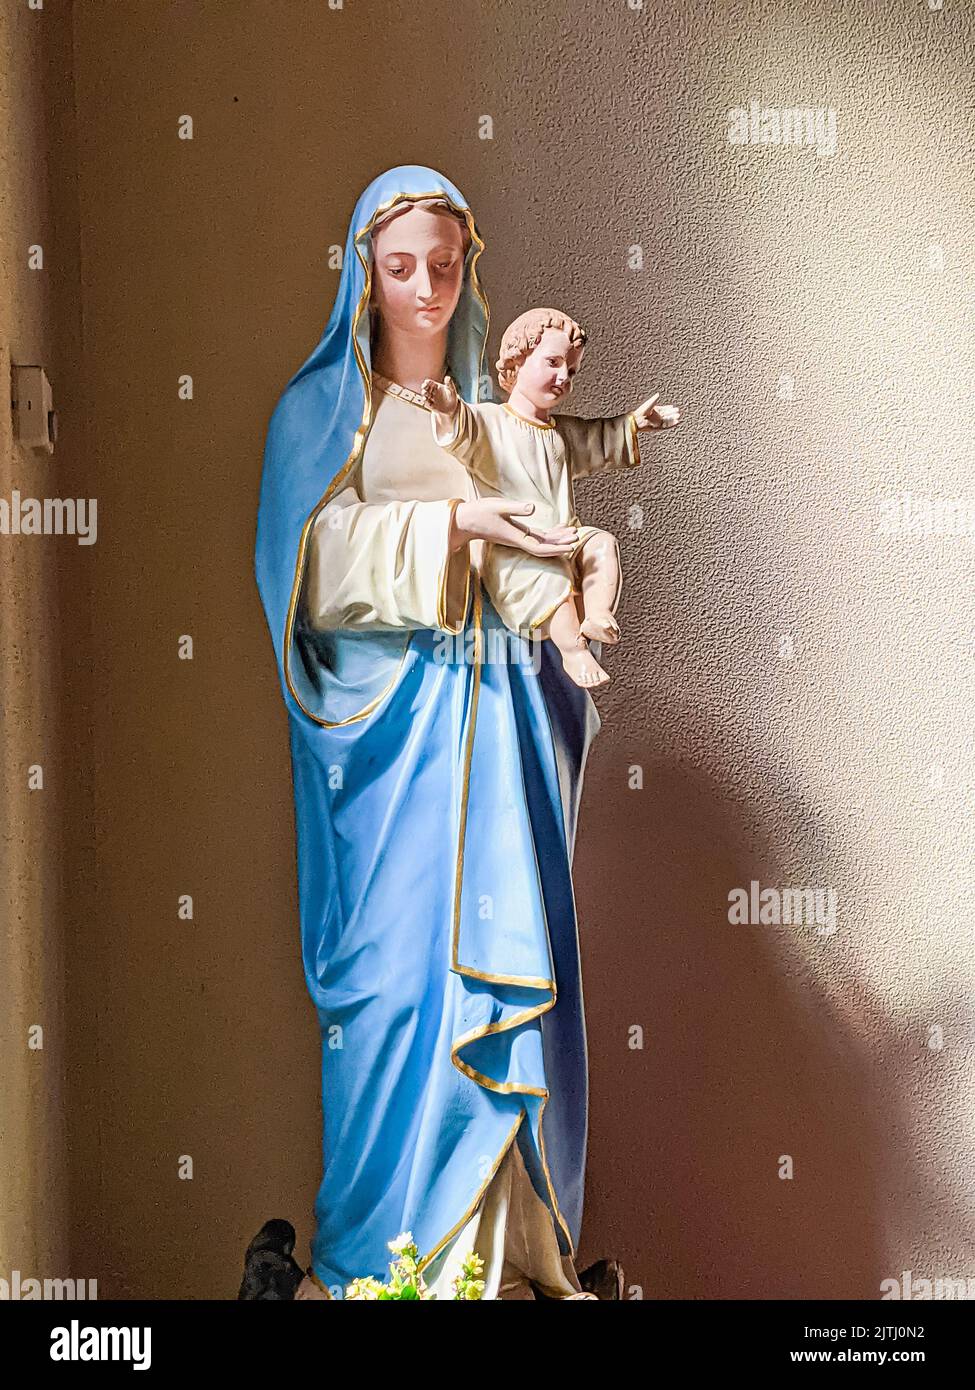 Statue of Saint Mary and Jesus inside a church building, Northern Ireland. Stock Photo